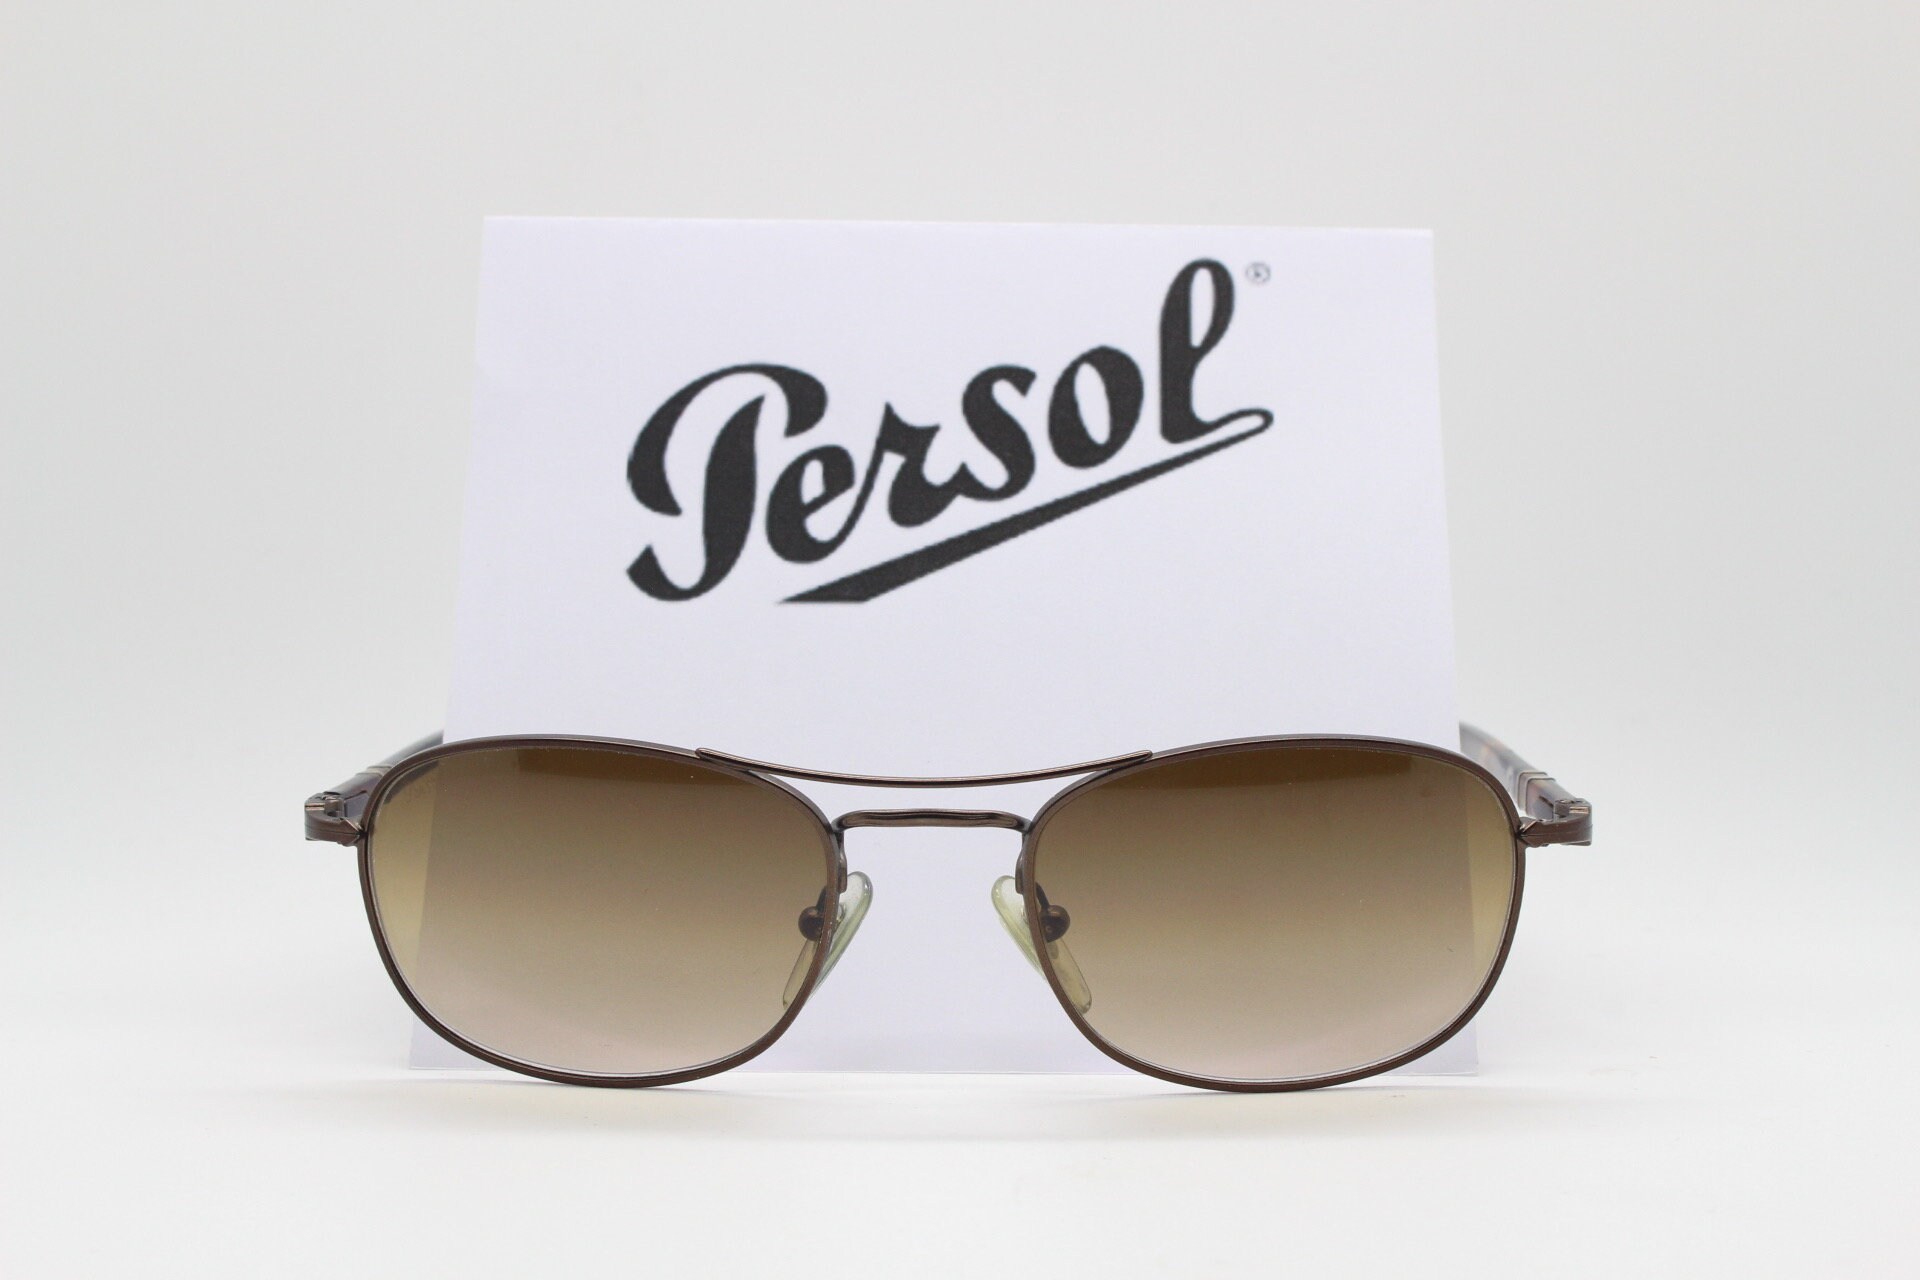 Persol meflecto s vintage oval sunglasses model /S made